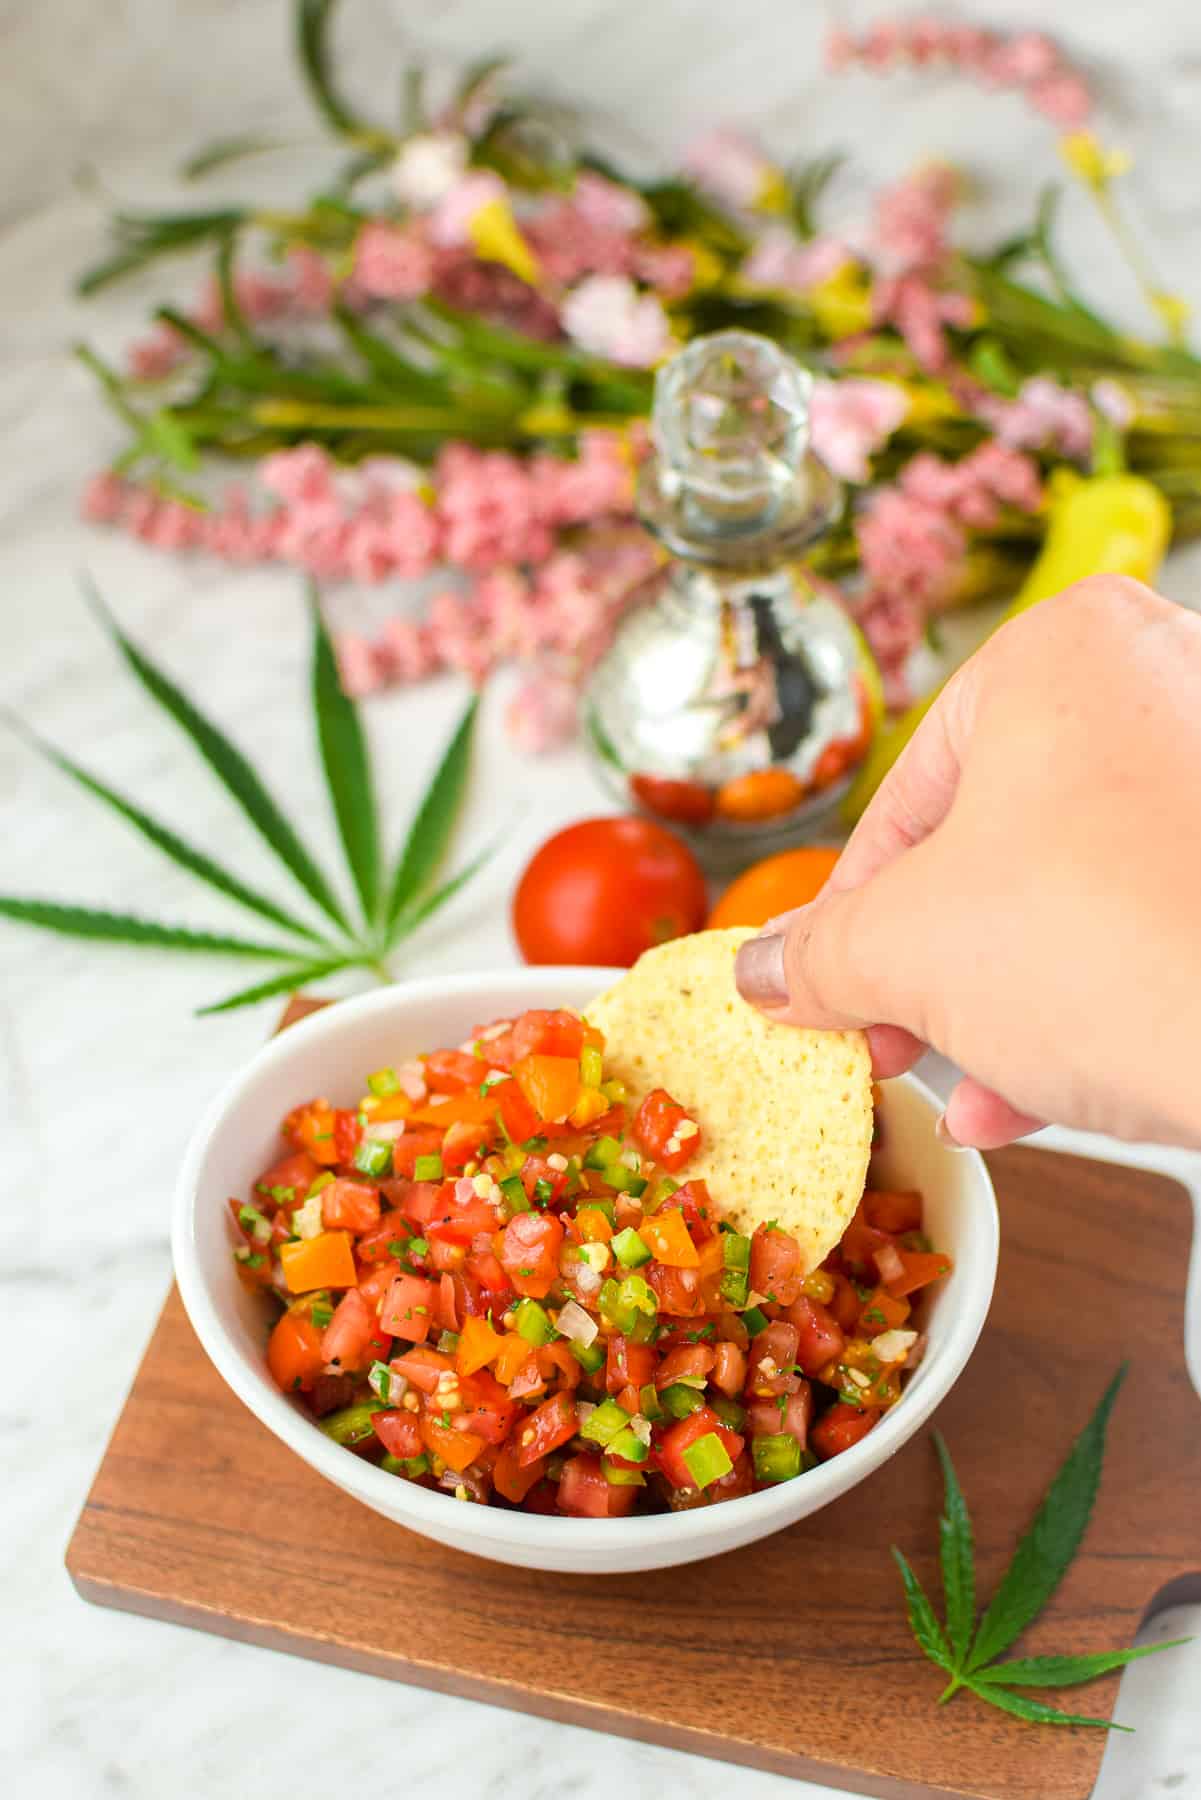 A finished bowl of cannabis infused salsa with a hand dipping a chip in